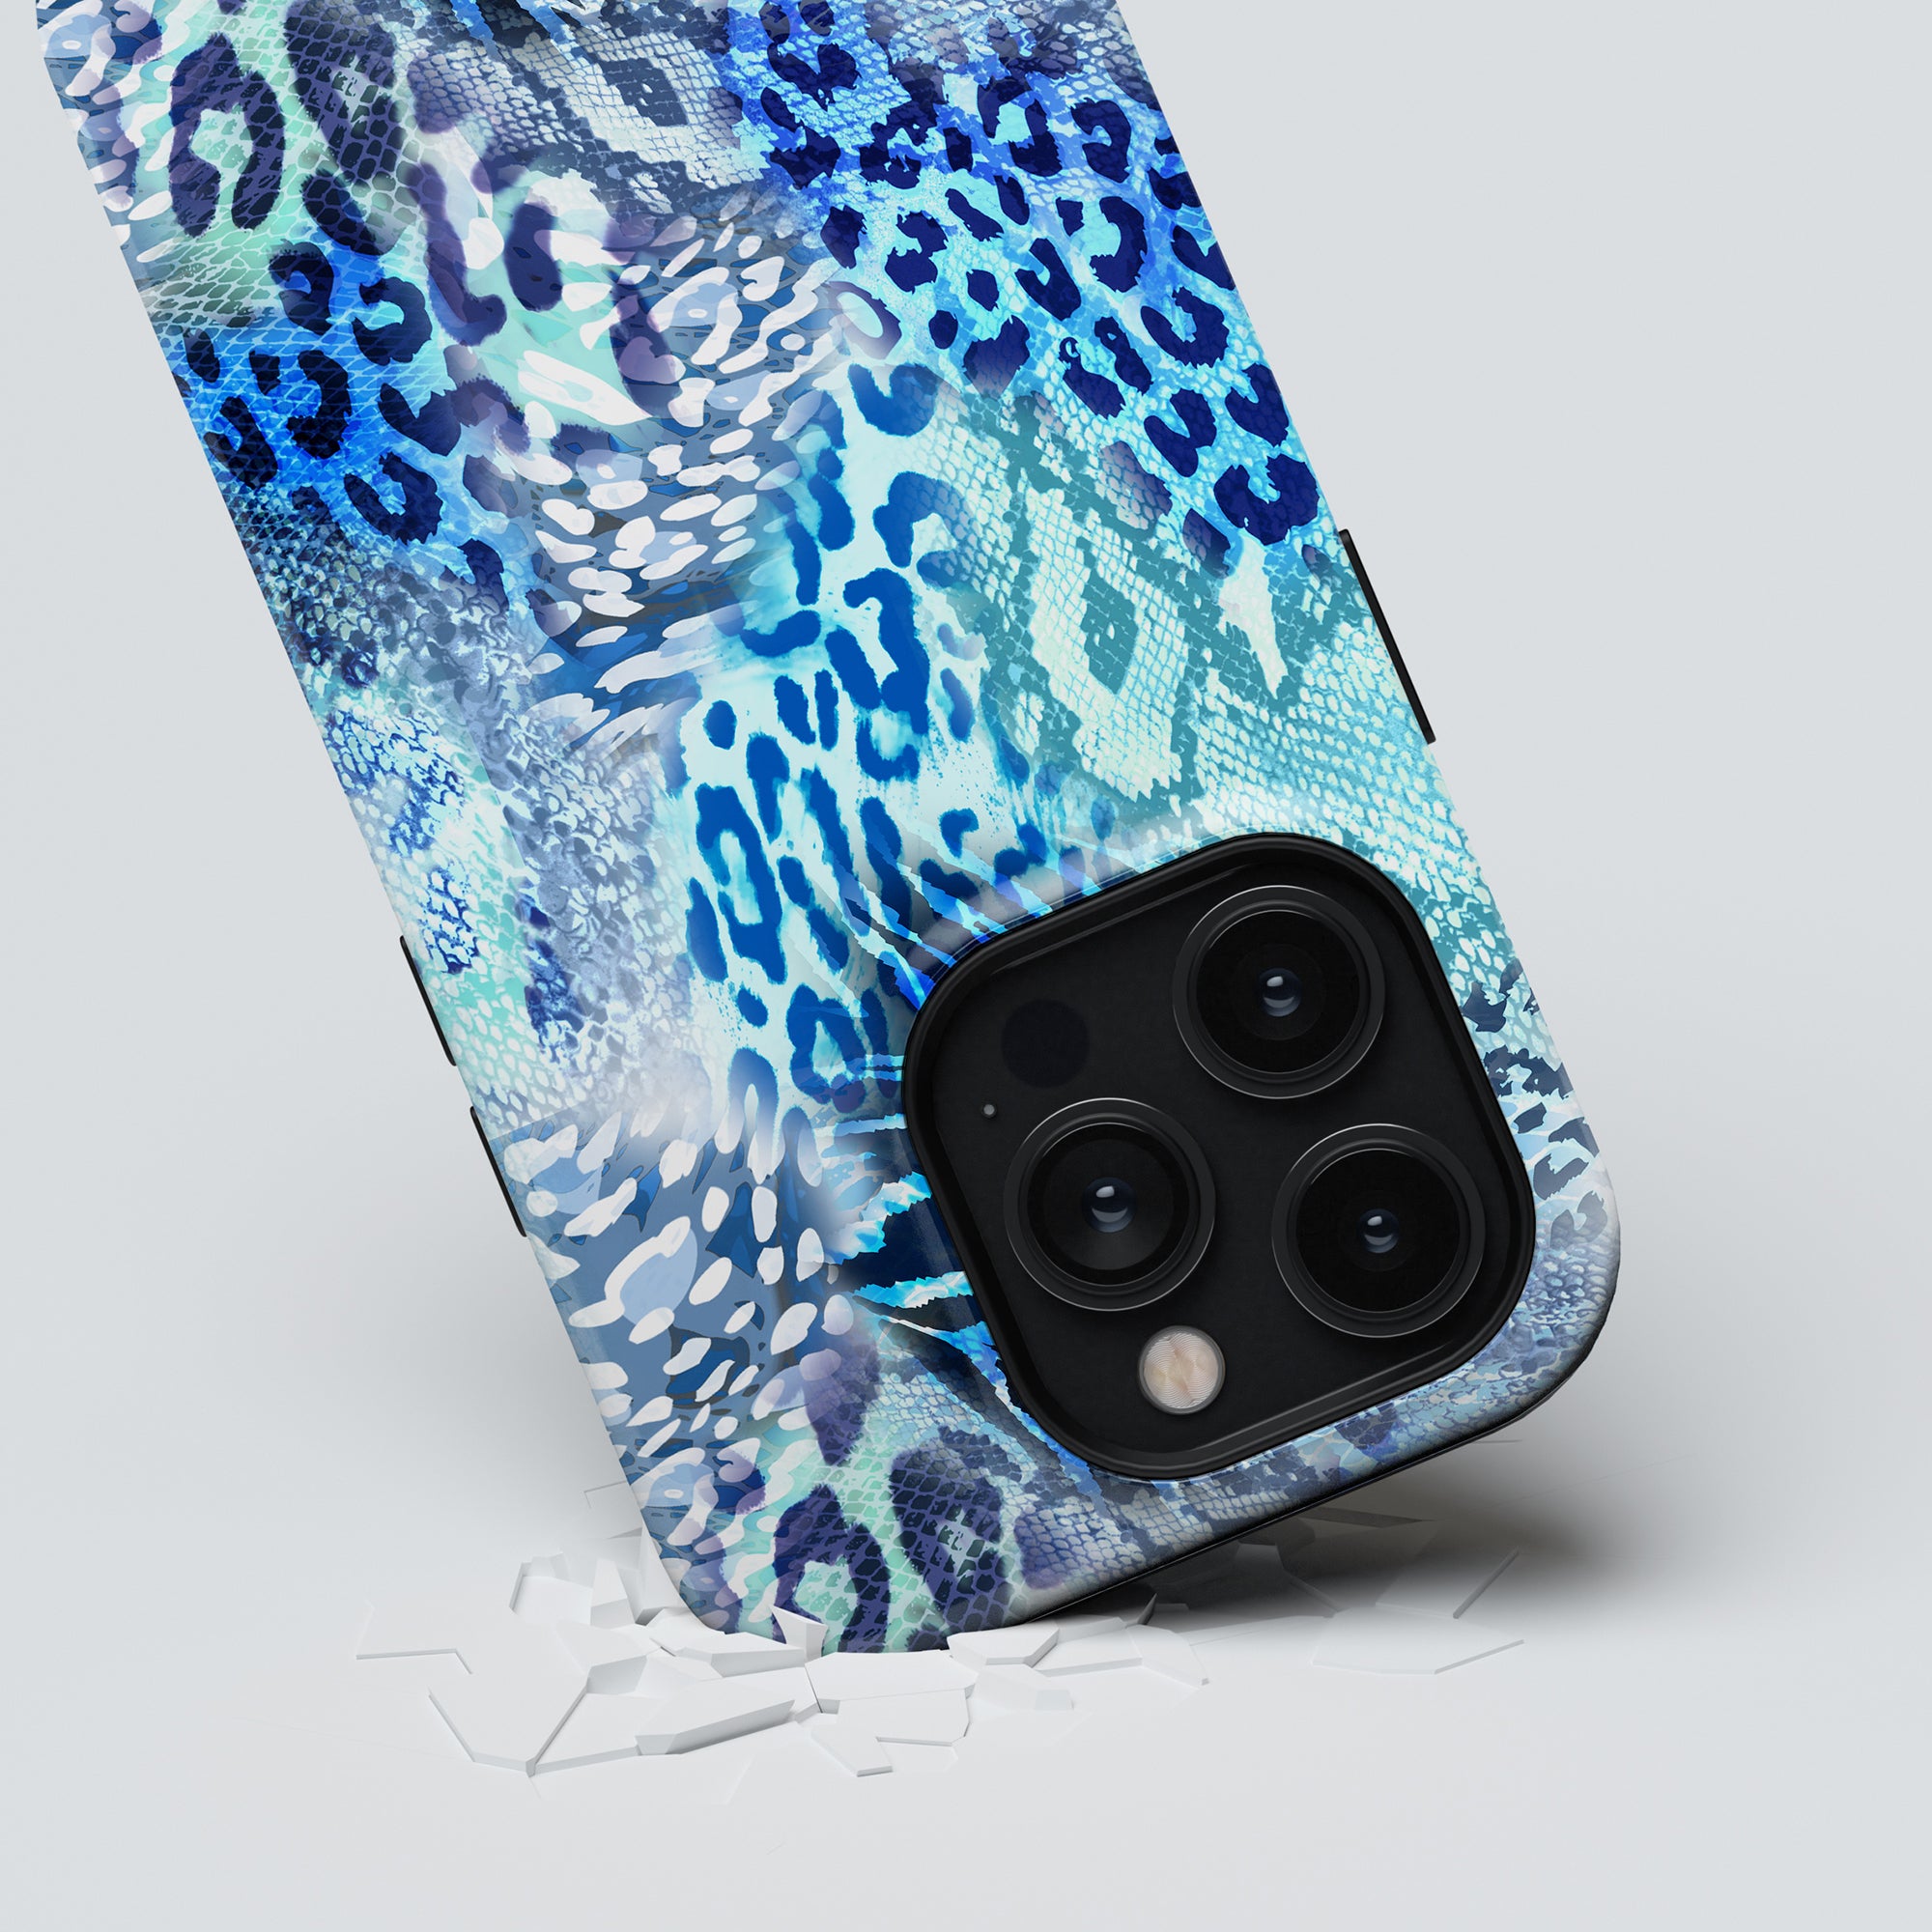 A smartphone with a Snow Leopard - Tough Case featuring a blue and white animal print rests against a white surface, surrounded by broken pieces of glass, indicating the phone has been dropped.